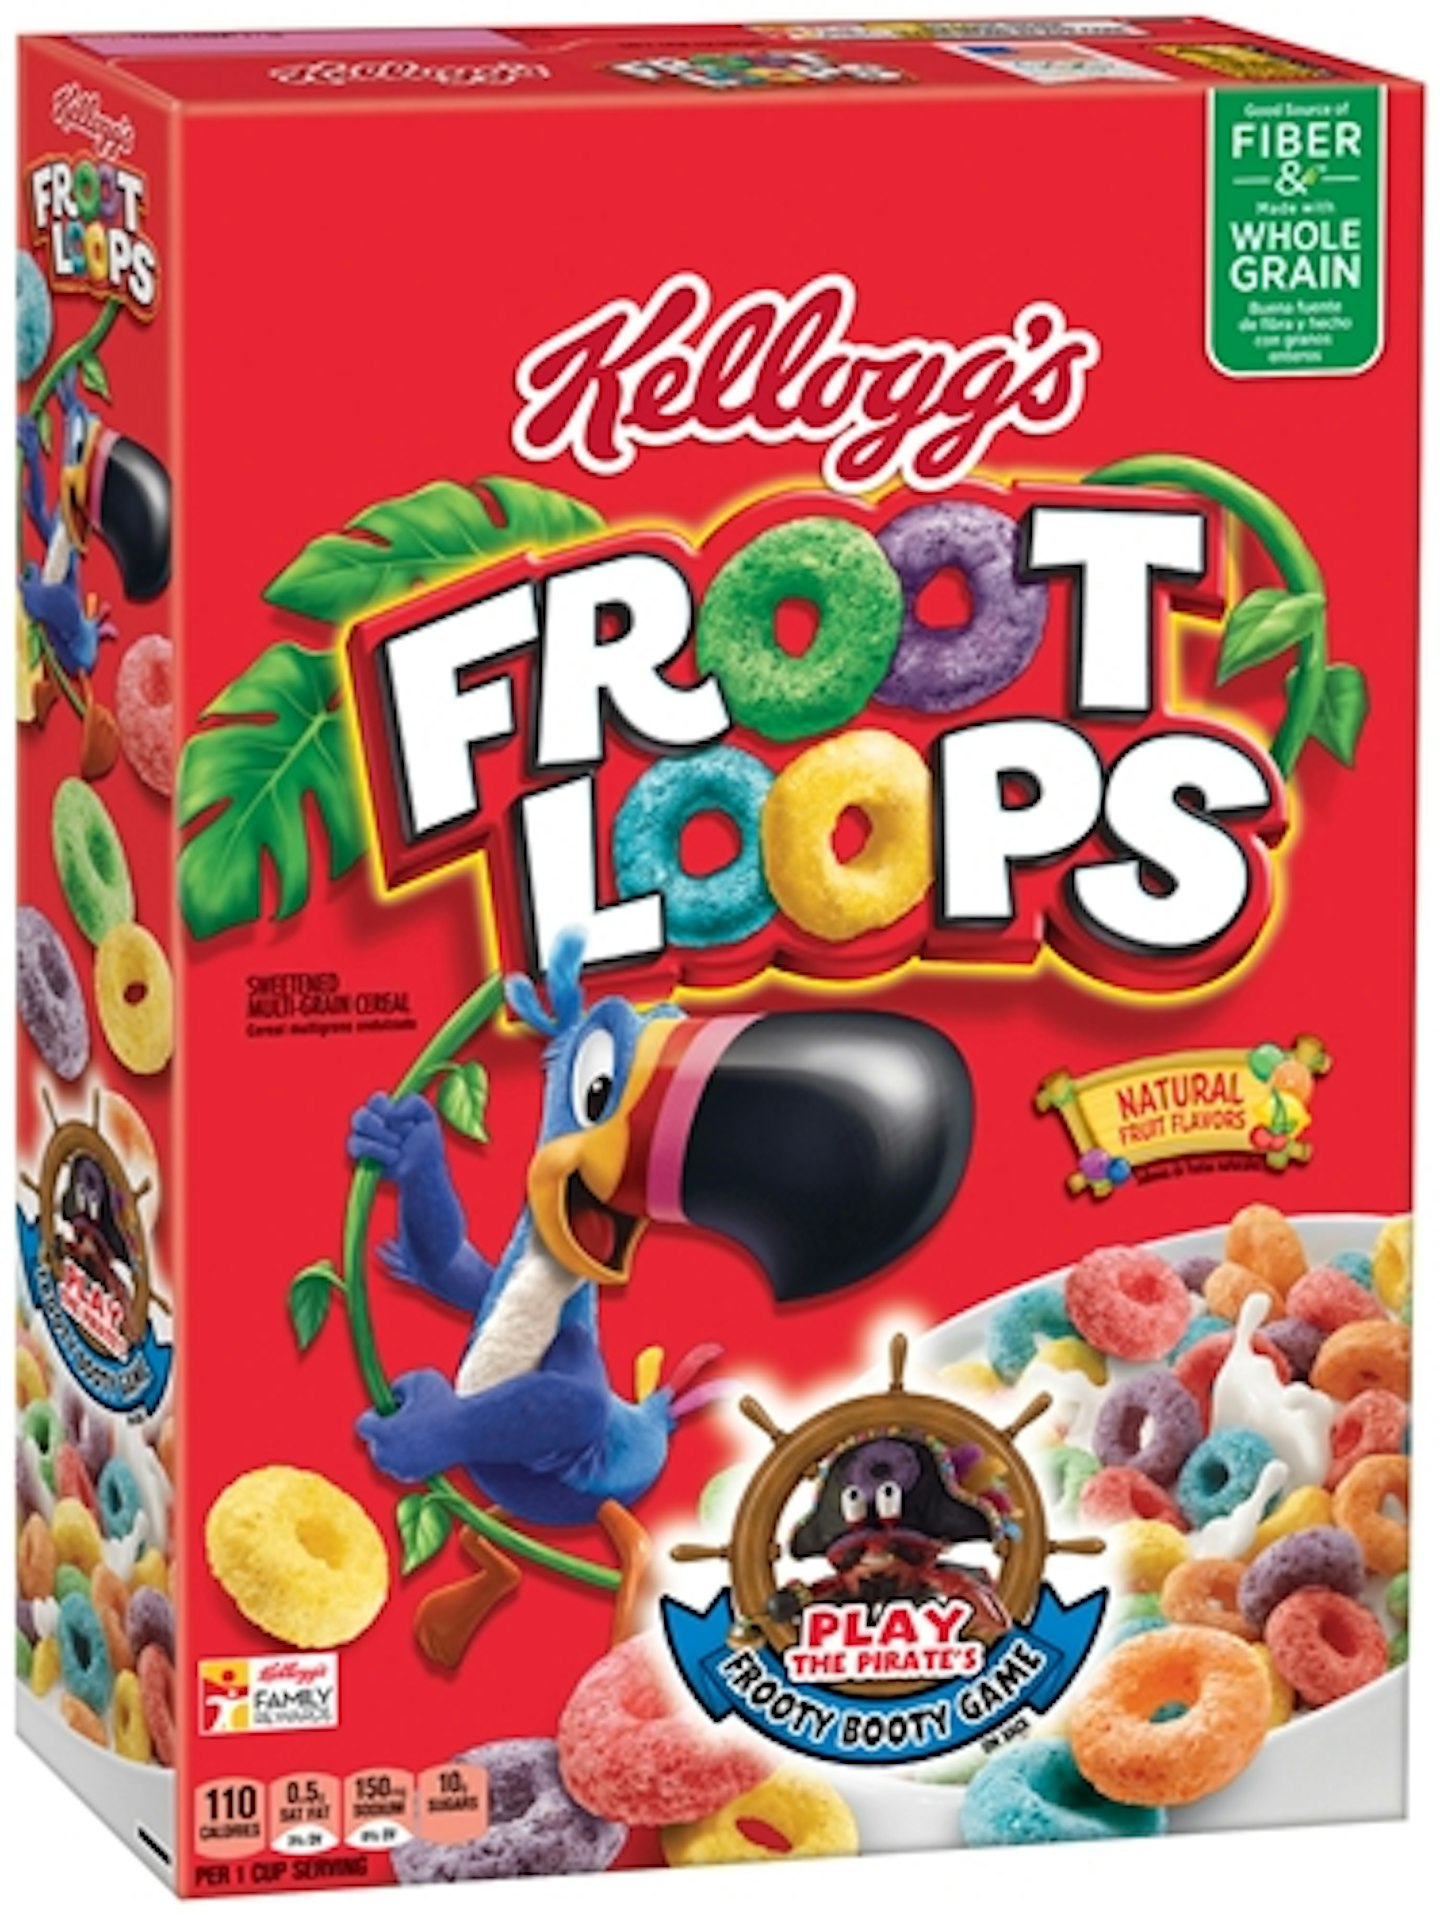 Discontinued cereals Froot Loops